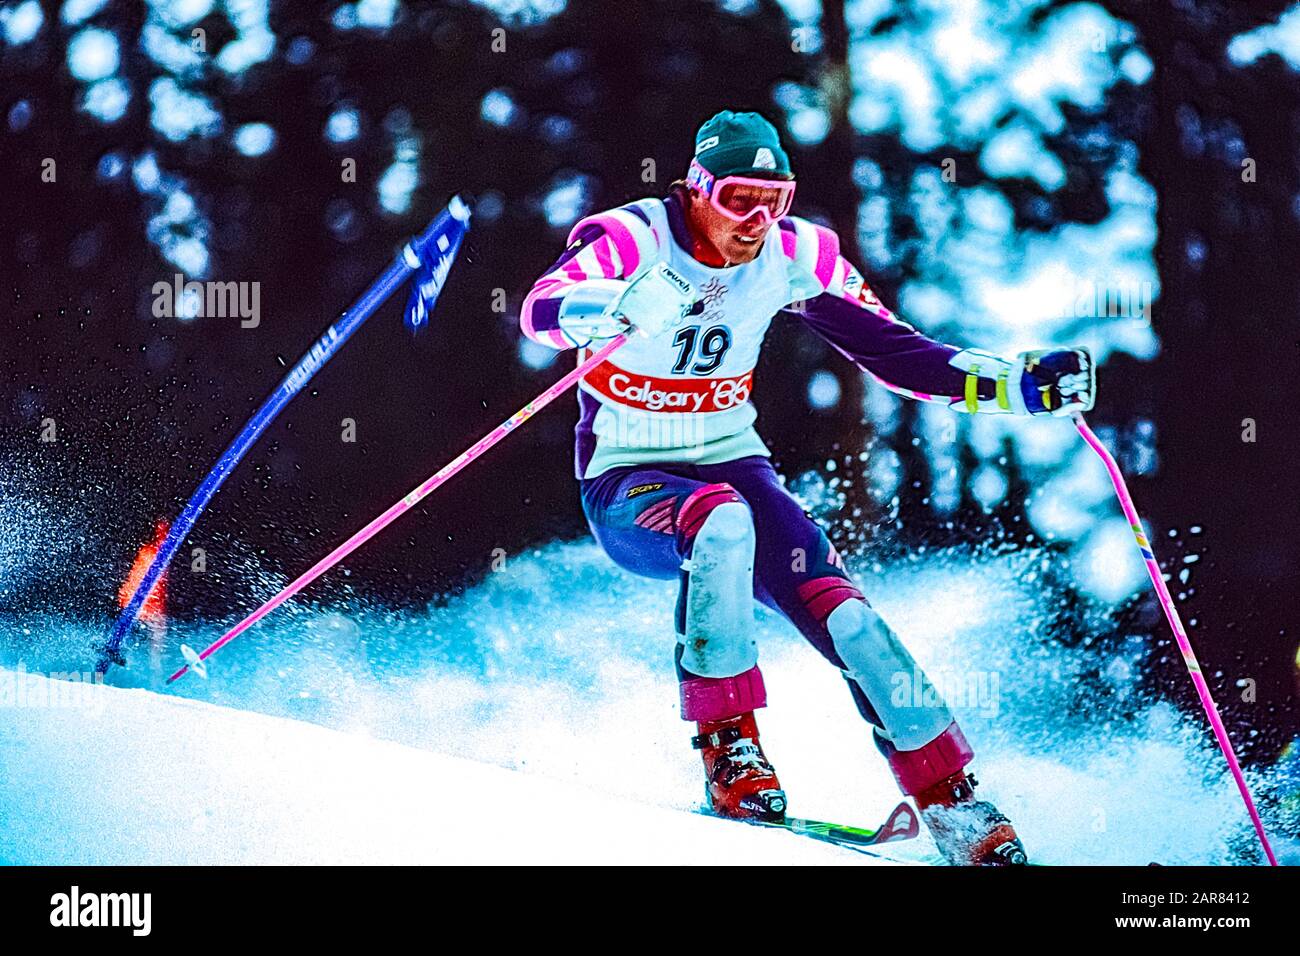 Pirmin Zurbriggen of Switzerland competing in the slalom at the 1988 Olympic Winter Games. Stock Photo